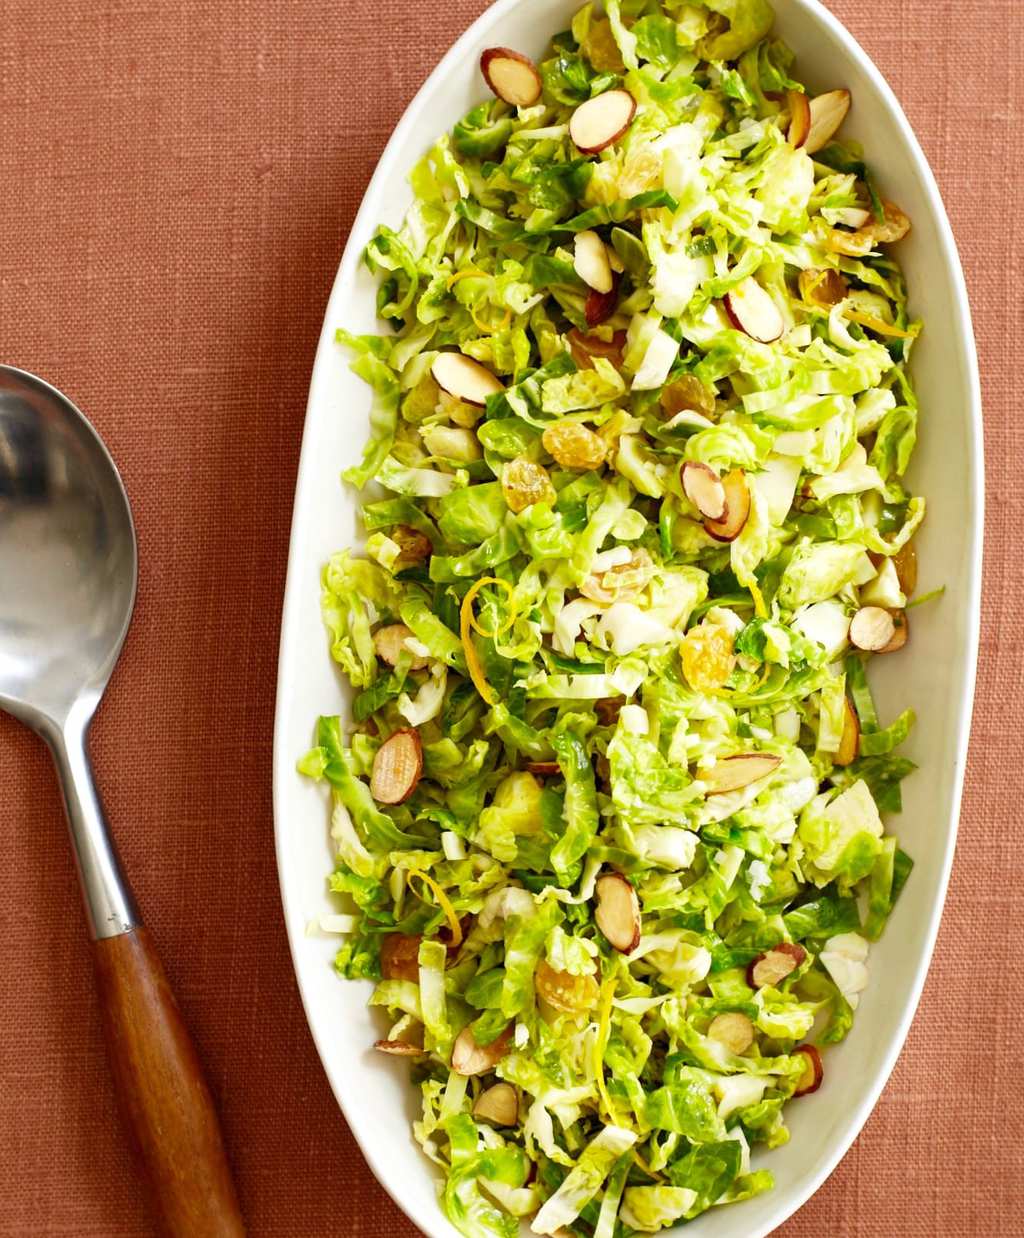 Shredded Brussels Sprouts with Orange and Almond in an oval dish